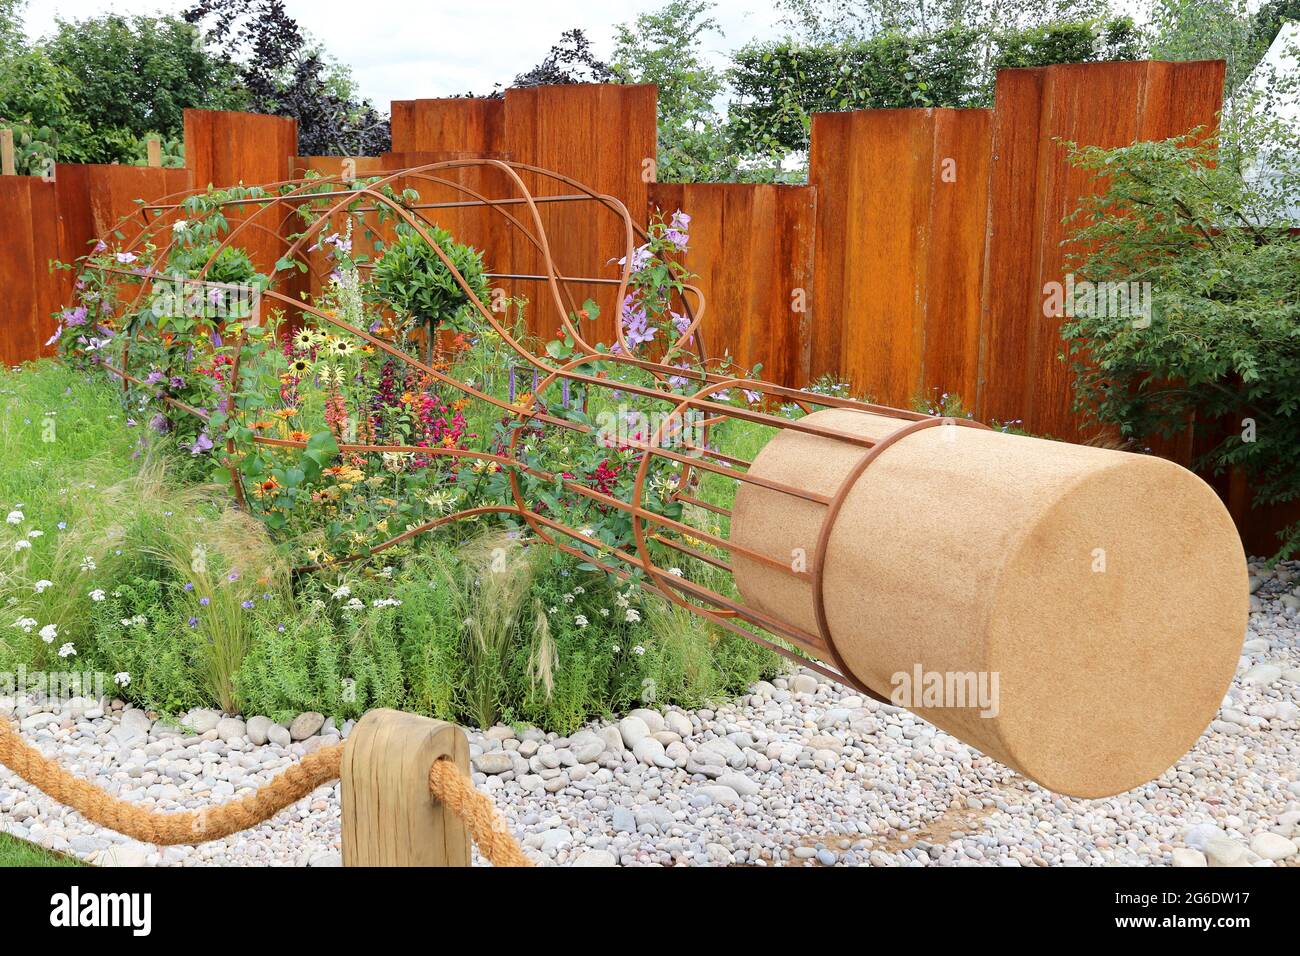 Canal & River Trust 'Message in a Bottle' Global Impact Garden, Silver Medal, RHS Hampton Court Palace Garden Festival 2021, 5 July 2021, London, UK Stock Photo